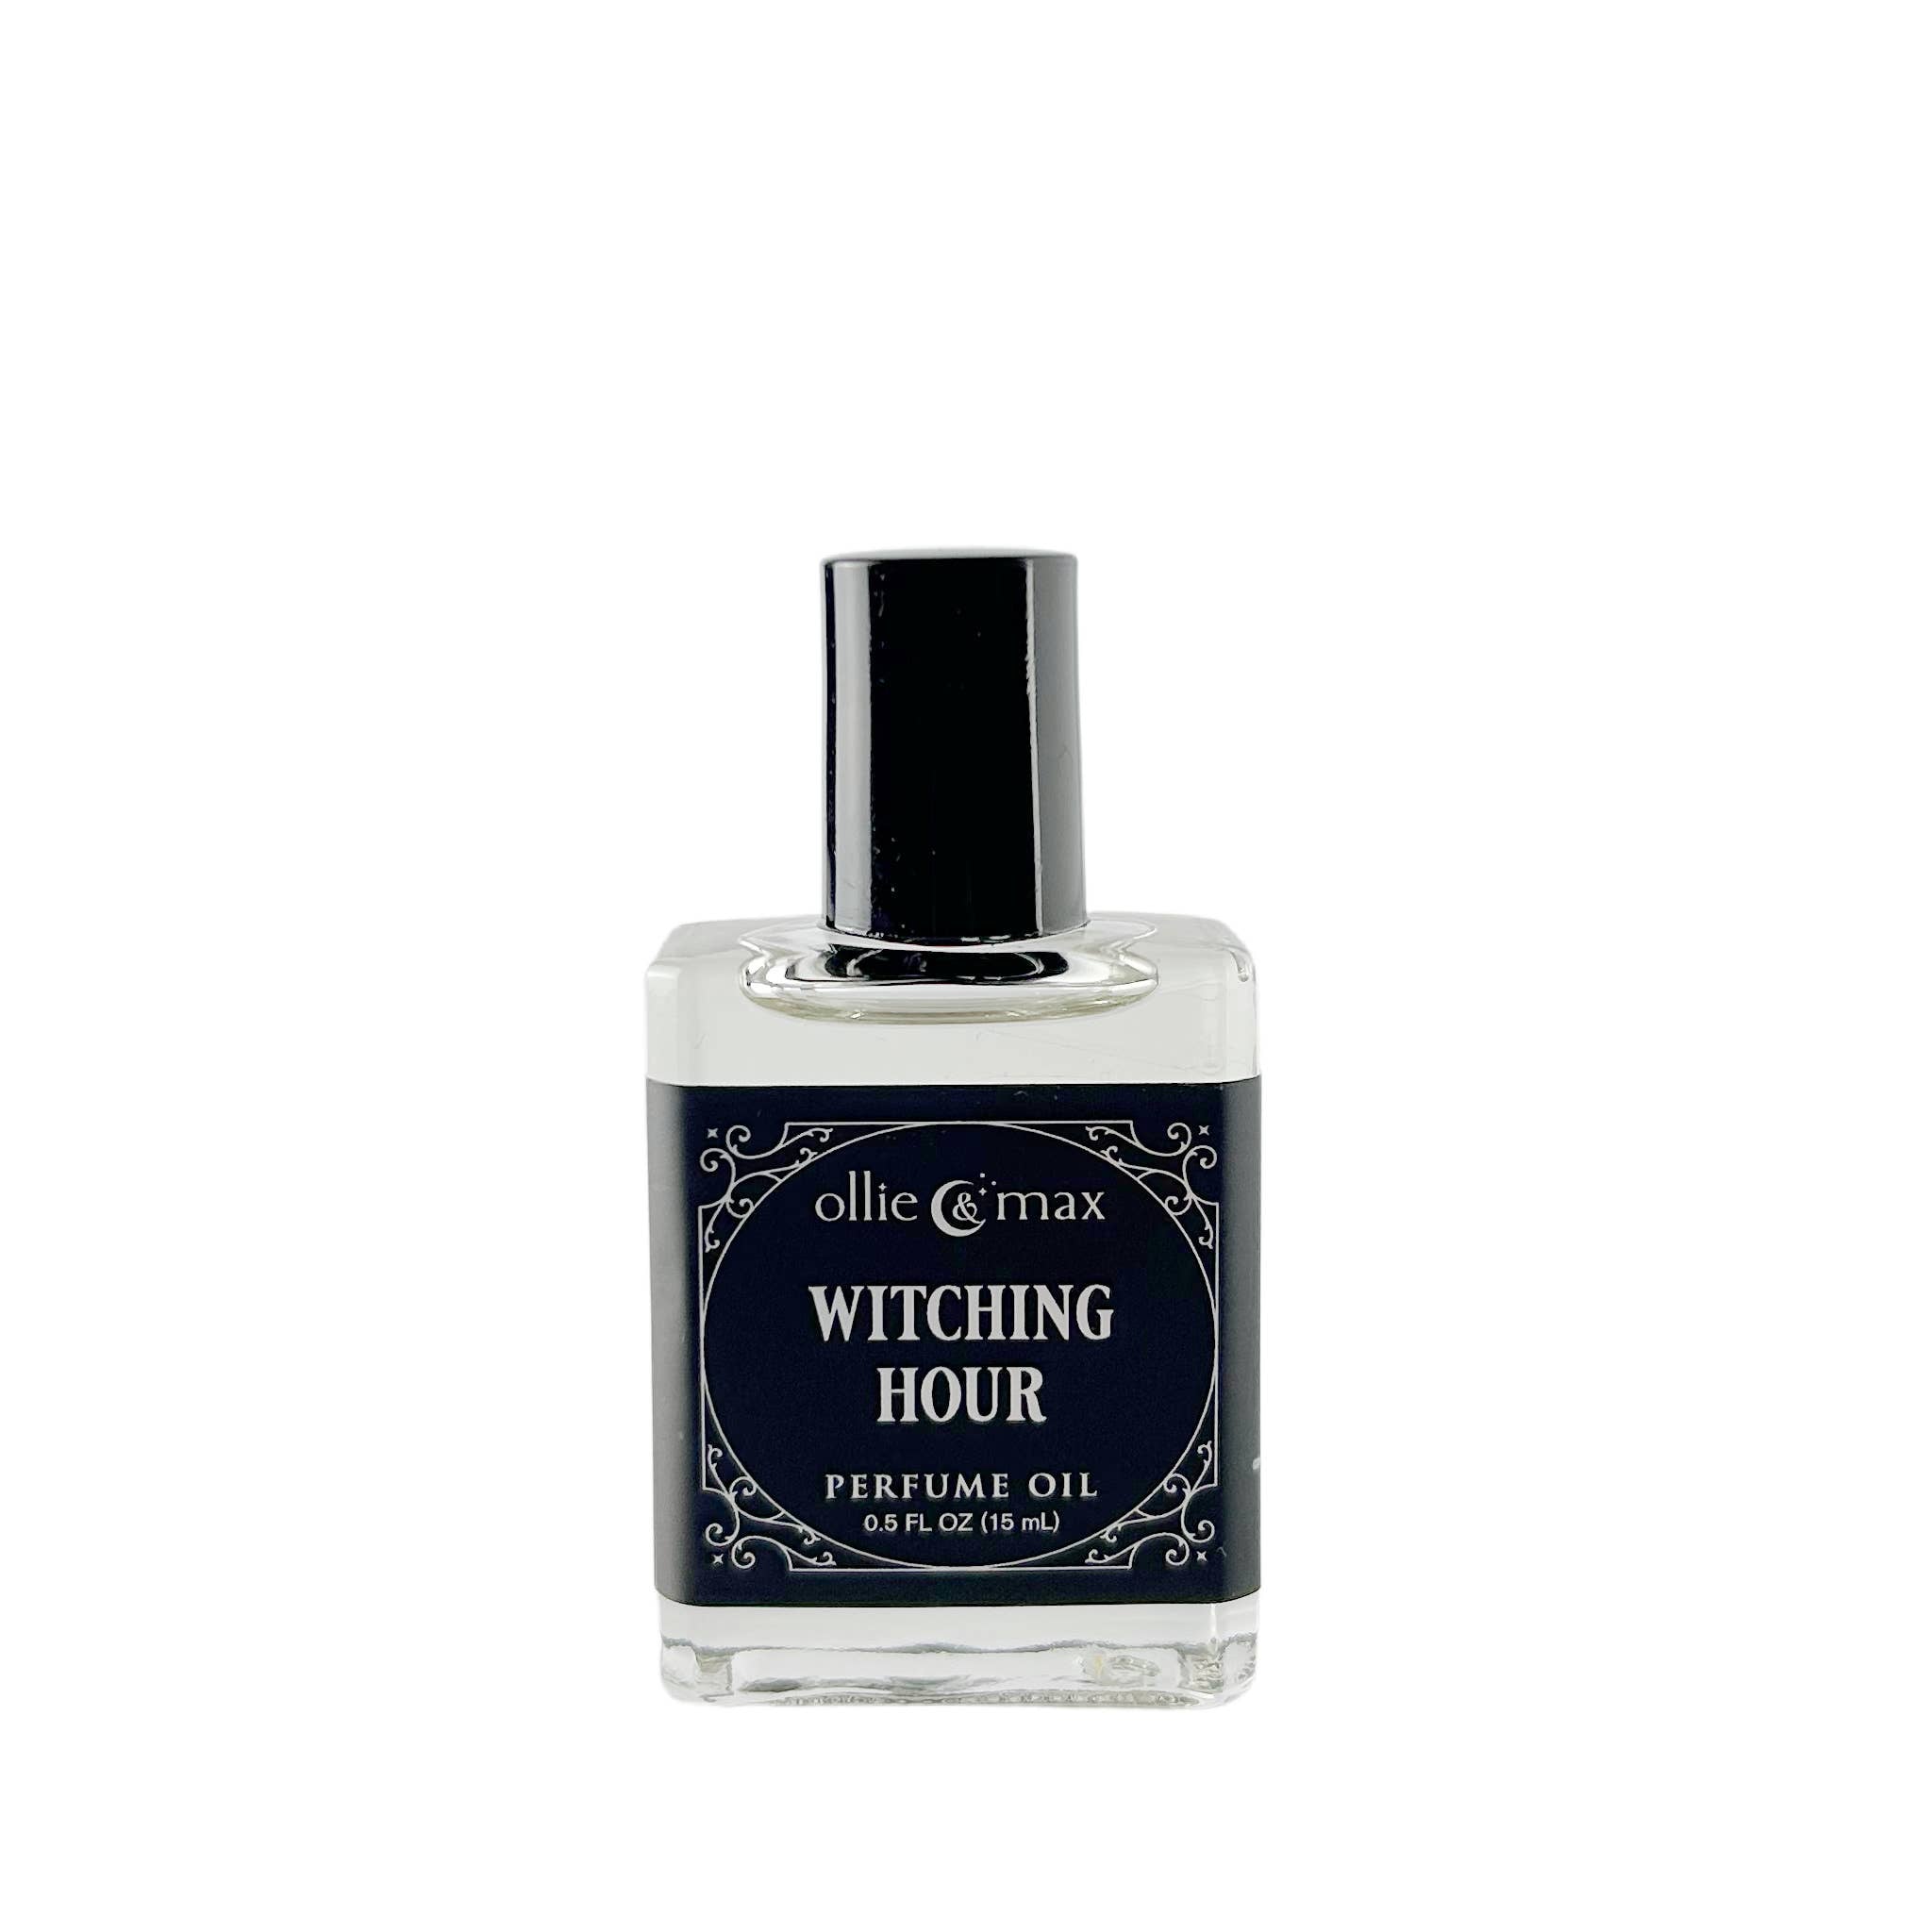 Witching Hour Vegan Perfume Oil